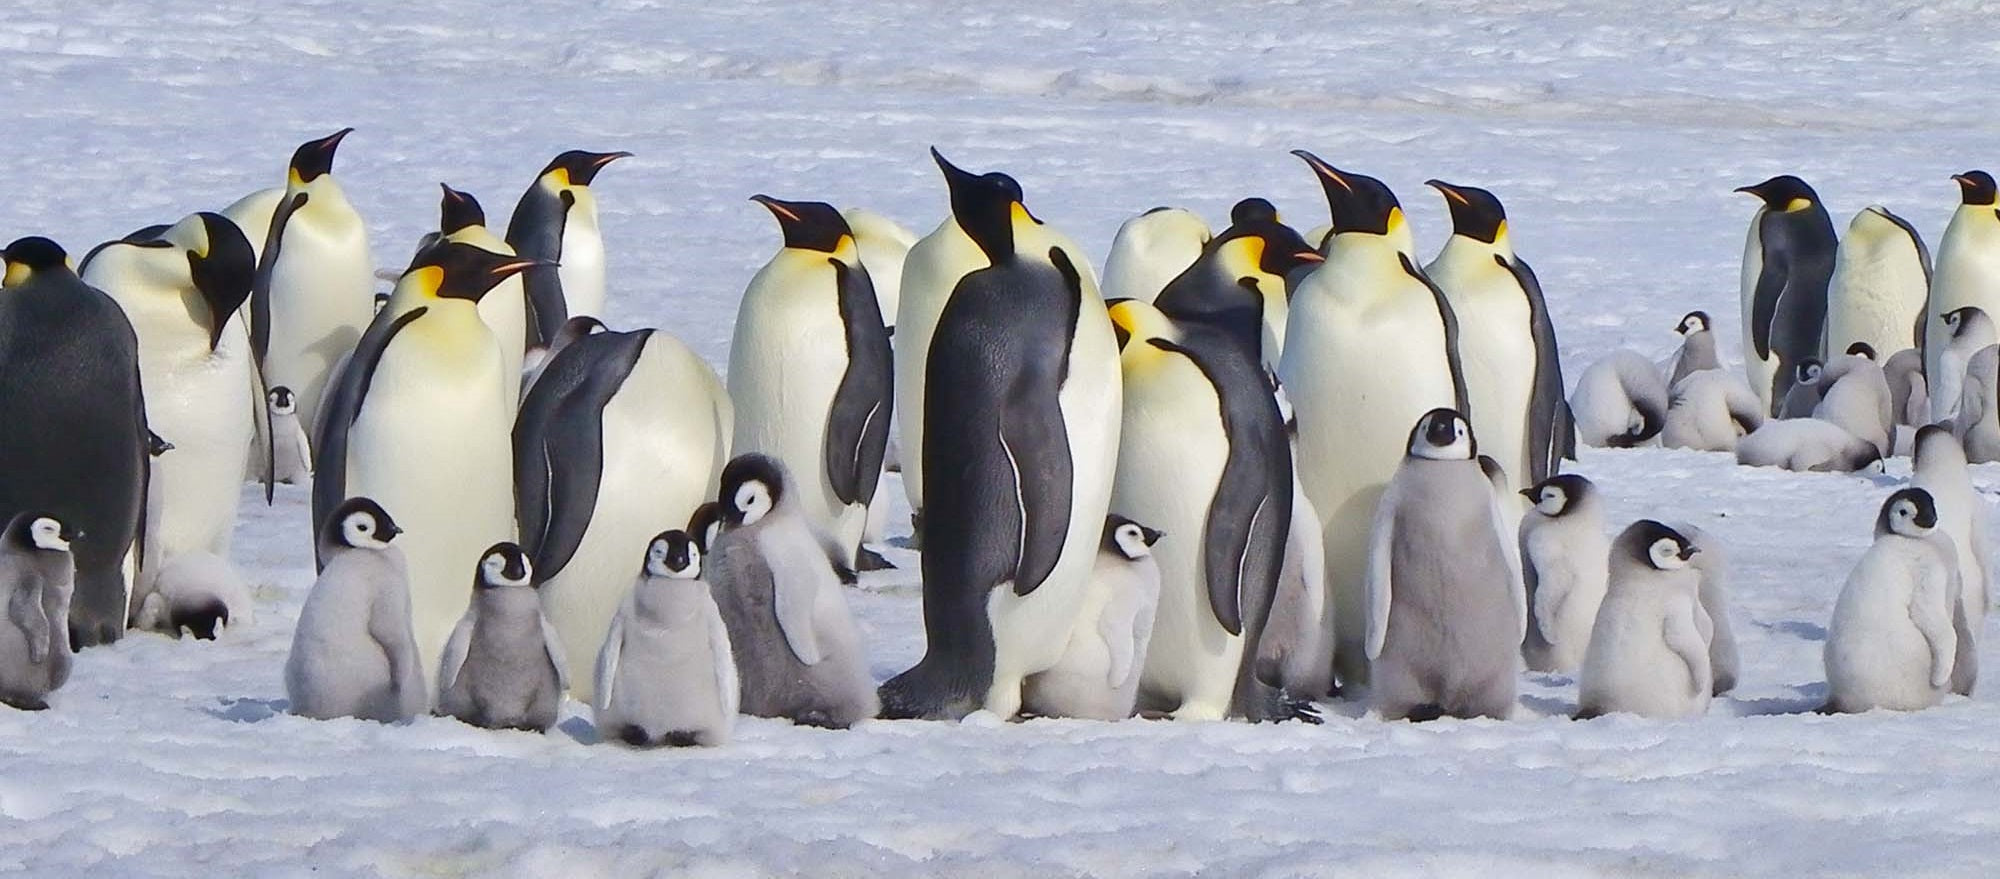 Thousands of Emperor Penguin Chicks Have Been Wiped Out